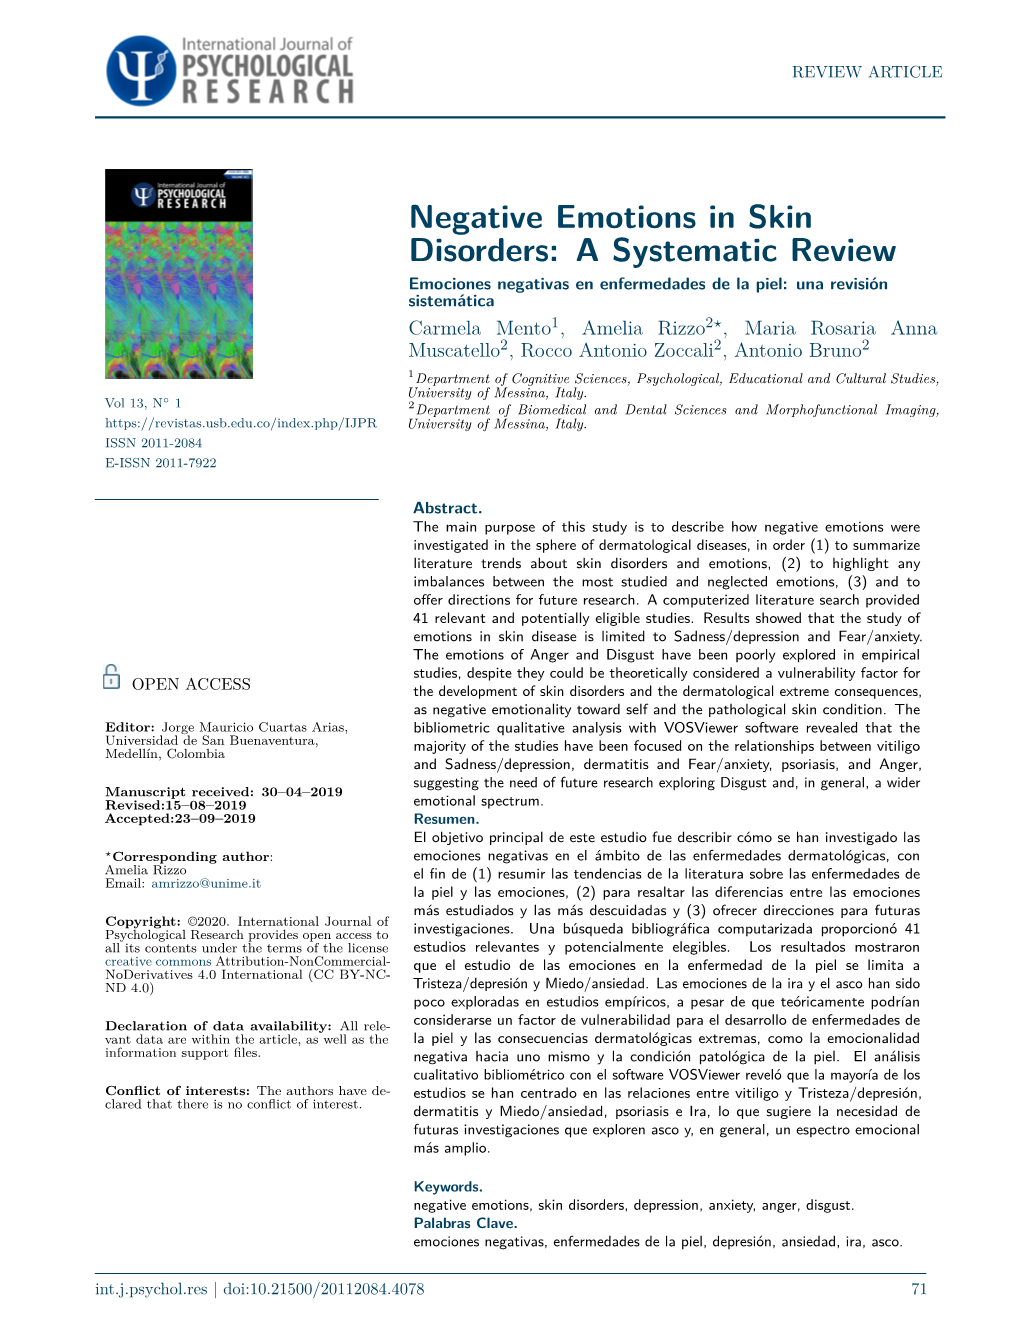 Negative Emotions in Skin Disorders: a Systematic Review